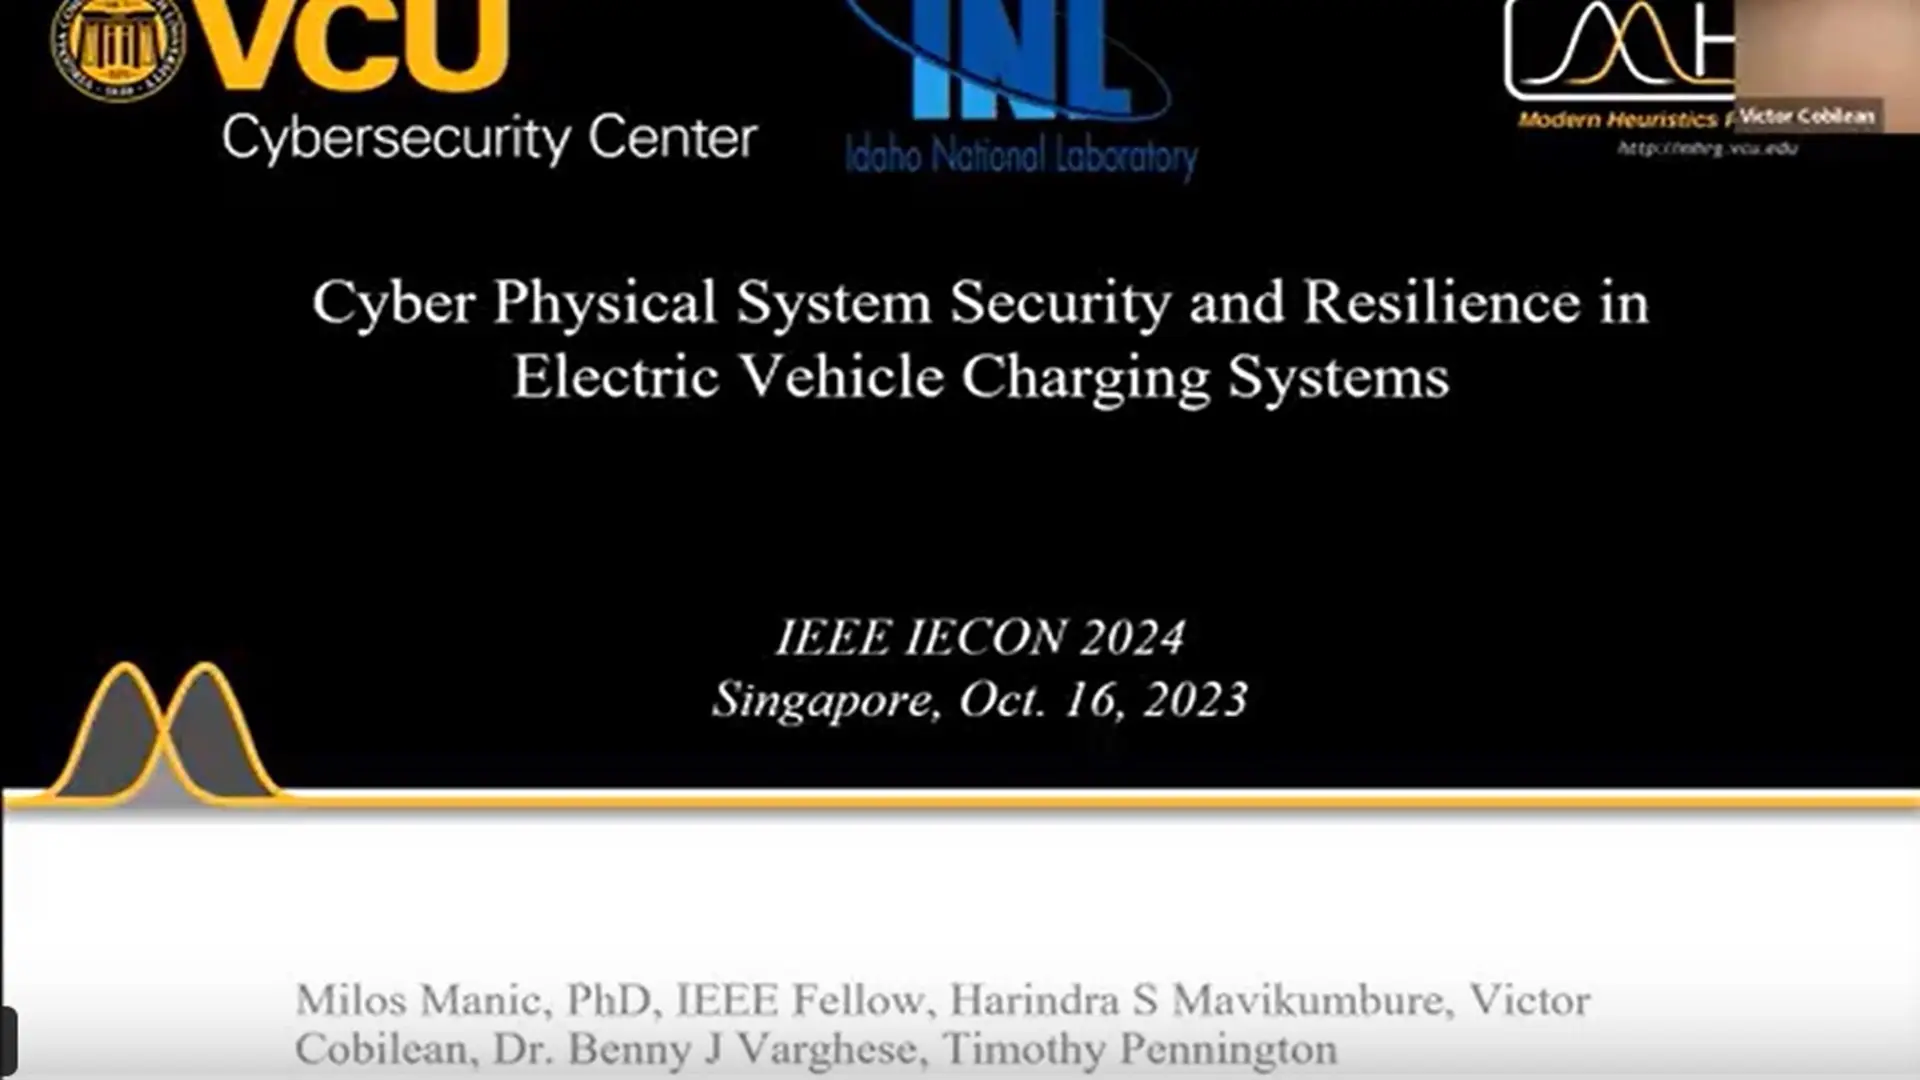 Cyber Physical System Security and Resilience in Electric Vehicle Charging Systems 